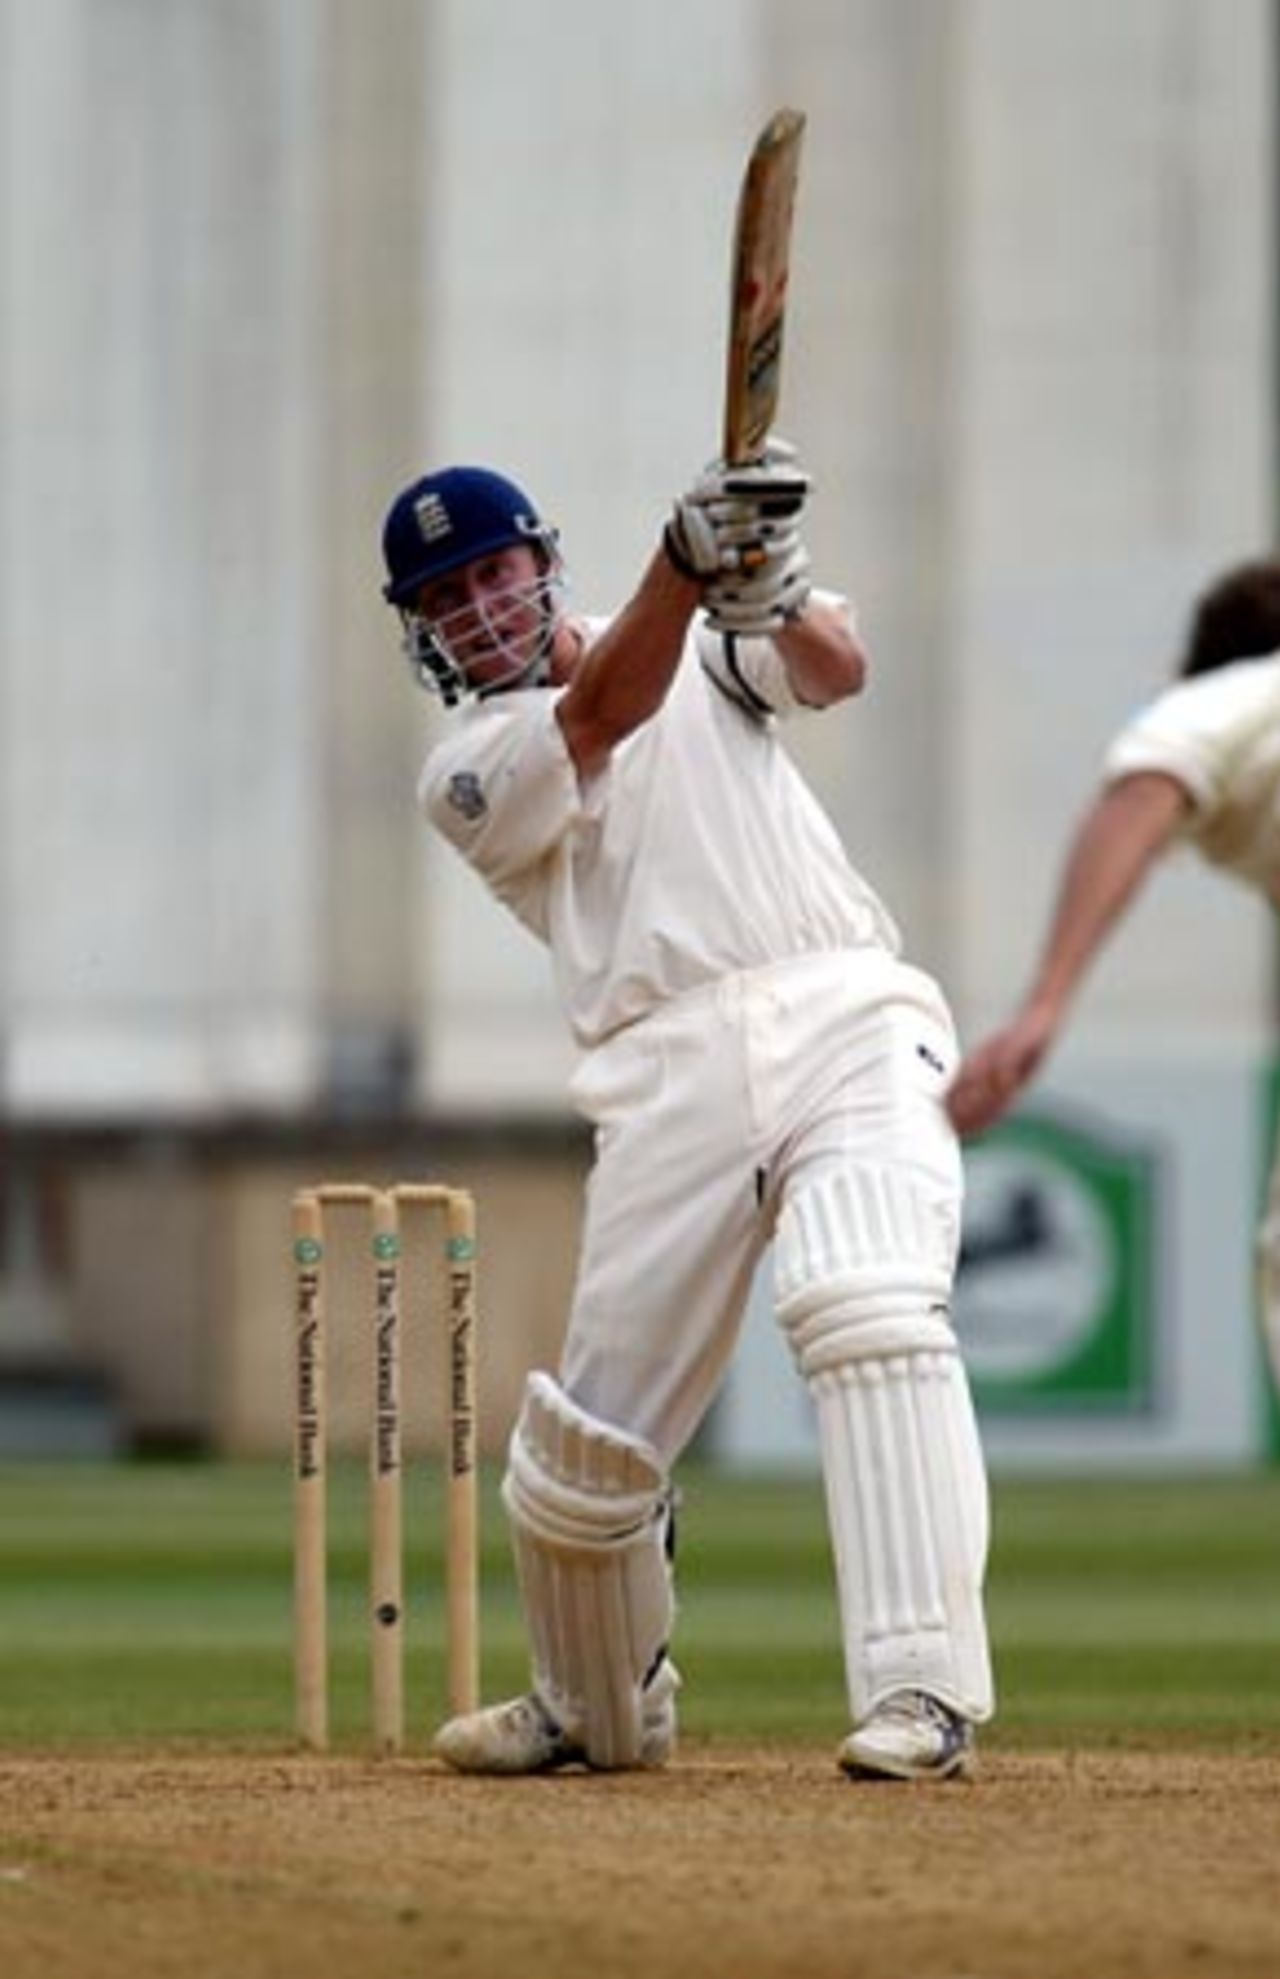 England batsman Andrew Flintoff heaves a delivery down the ground during his second innings of 75. 2nd Test: New Zealand v England at Basin Reserve, Wellington, 21-25 March 2002 (25 March 2002).